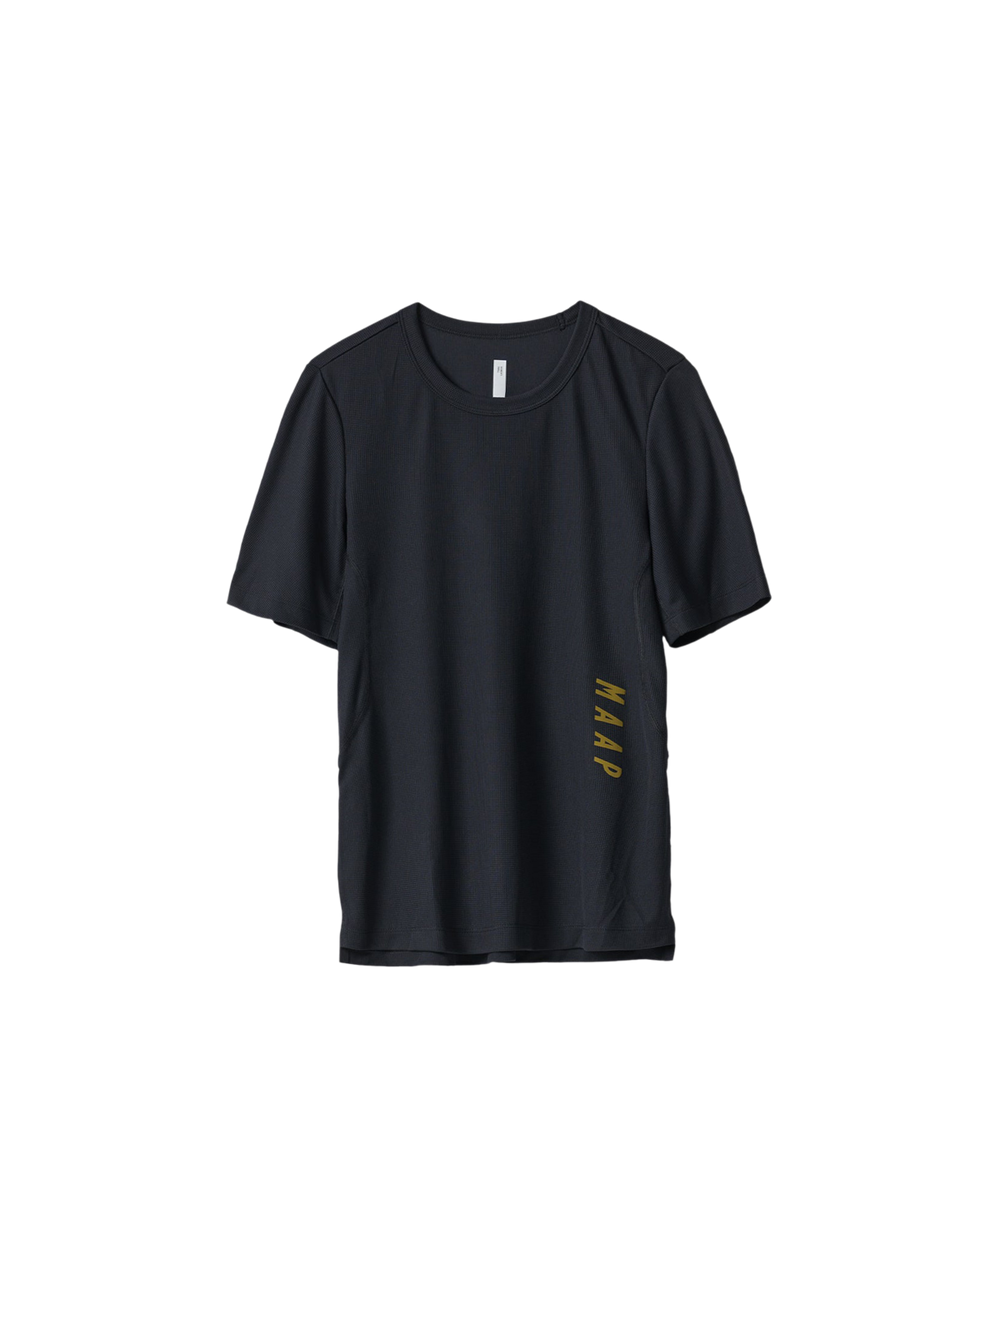 Product Image for Women's Alt_Road Ride Tee 3.0